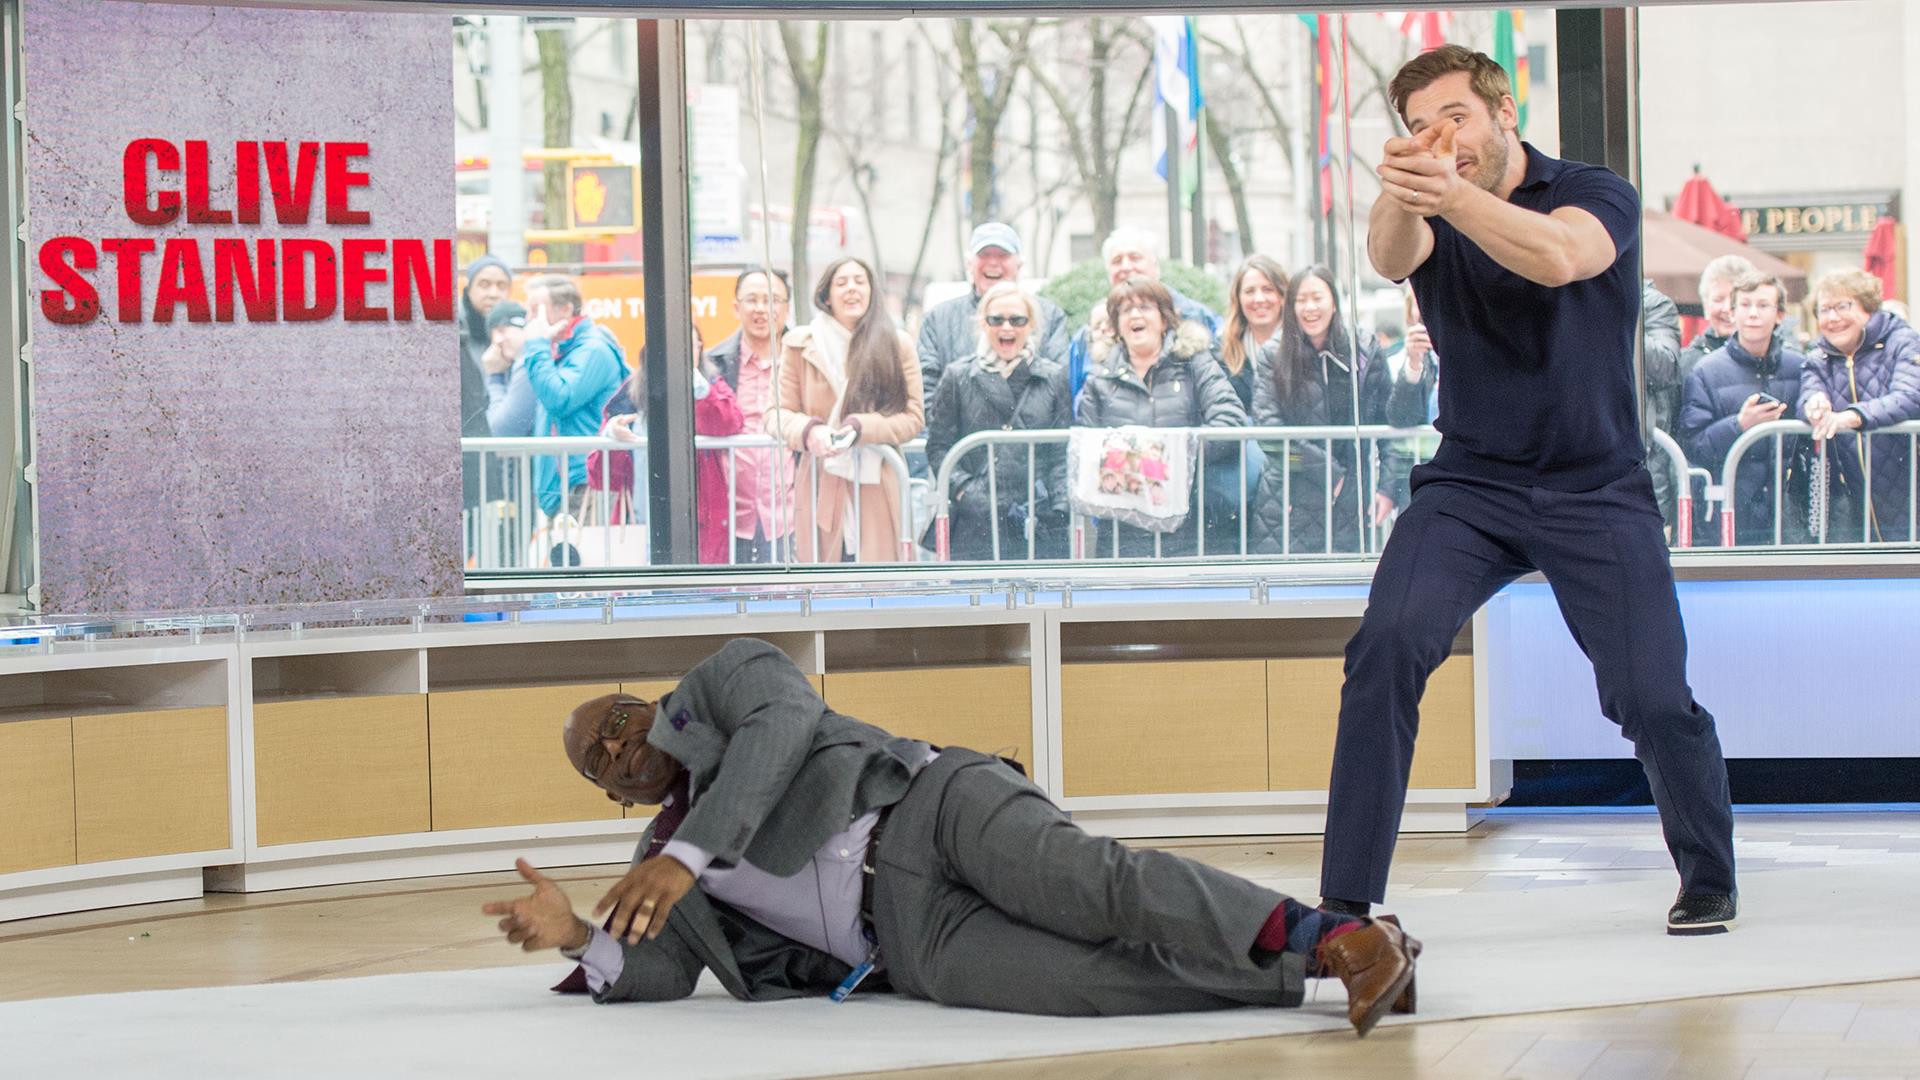 Watch Al Roker tackle a live action stunt with 'Taken' star Clive Standen